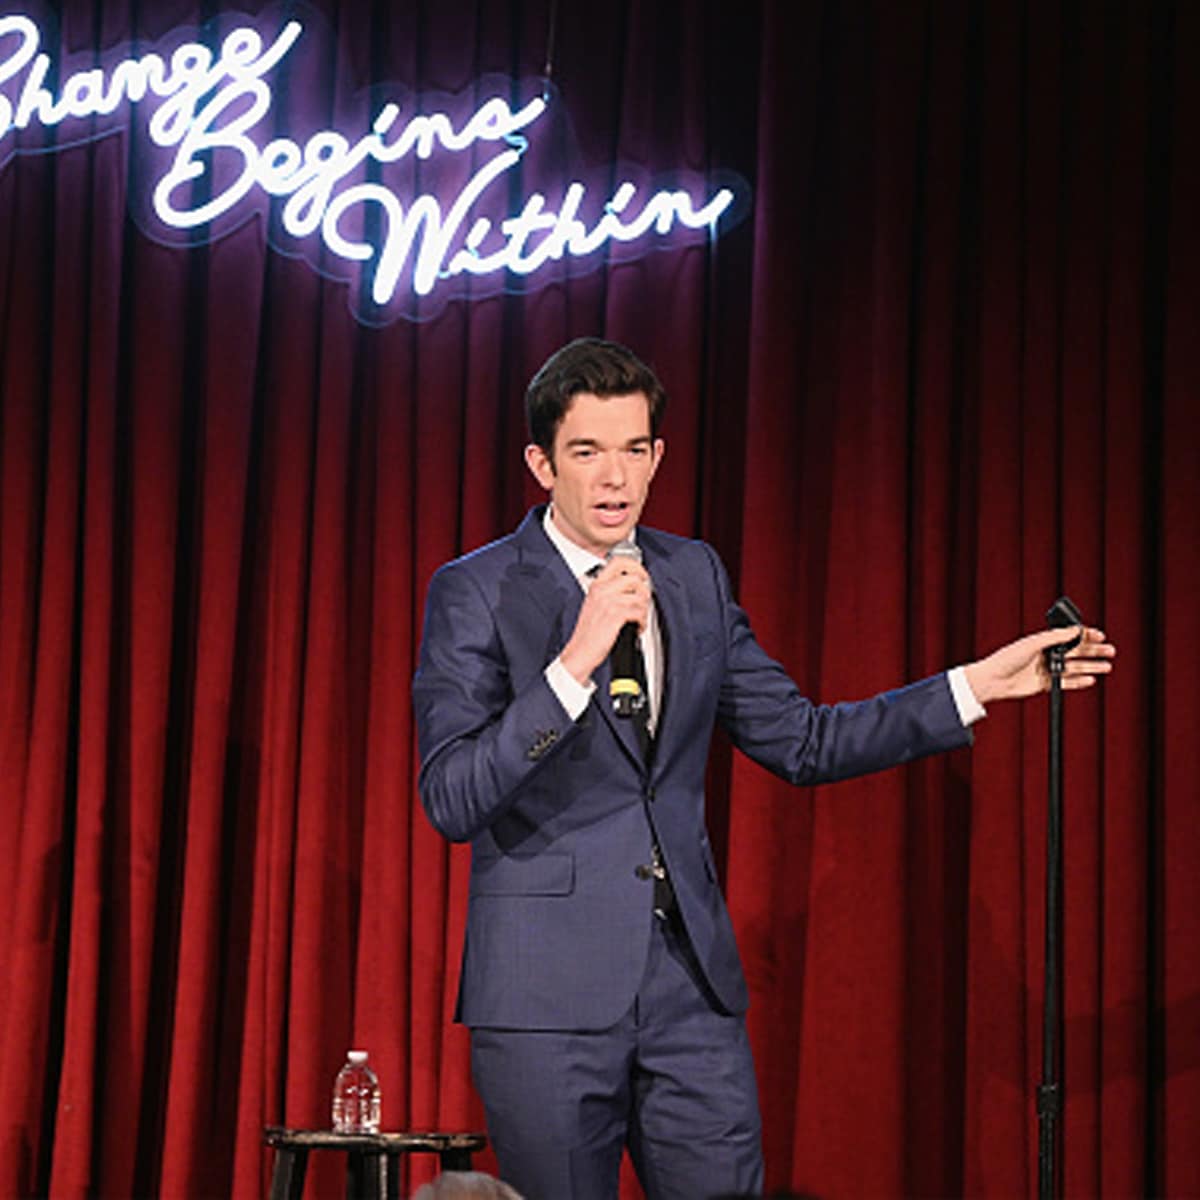 John Mulaney performs onstage during the David Lynch Foundation's 14th Annual Change Begins Within Gala